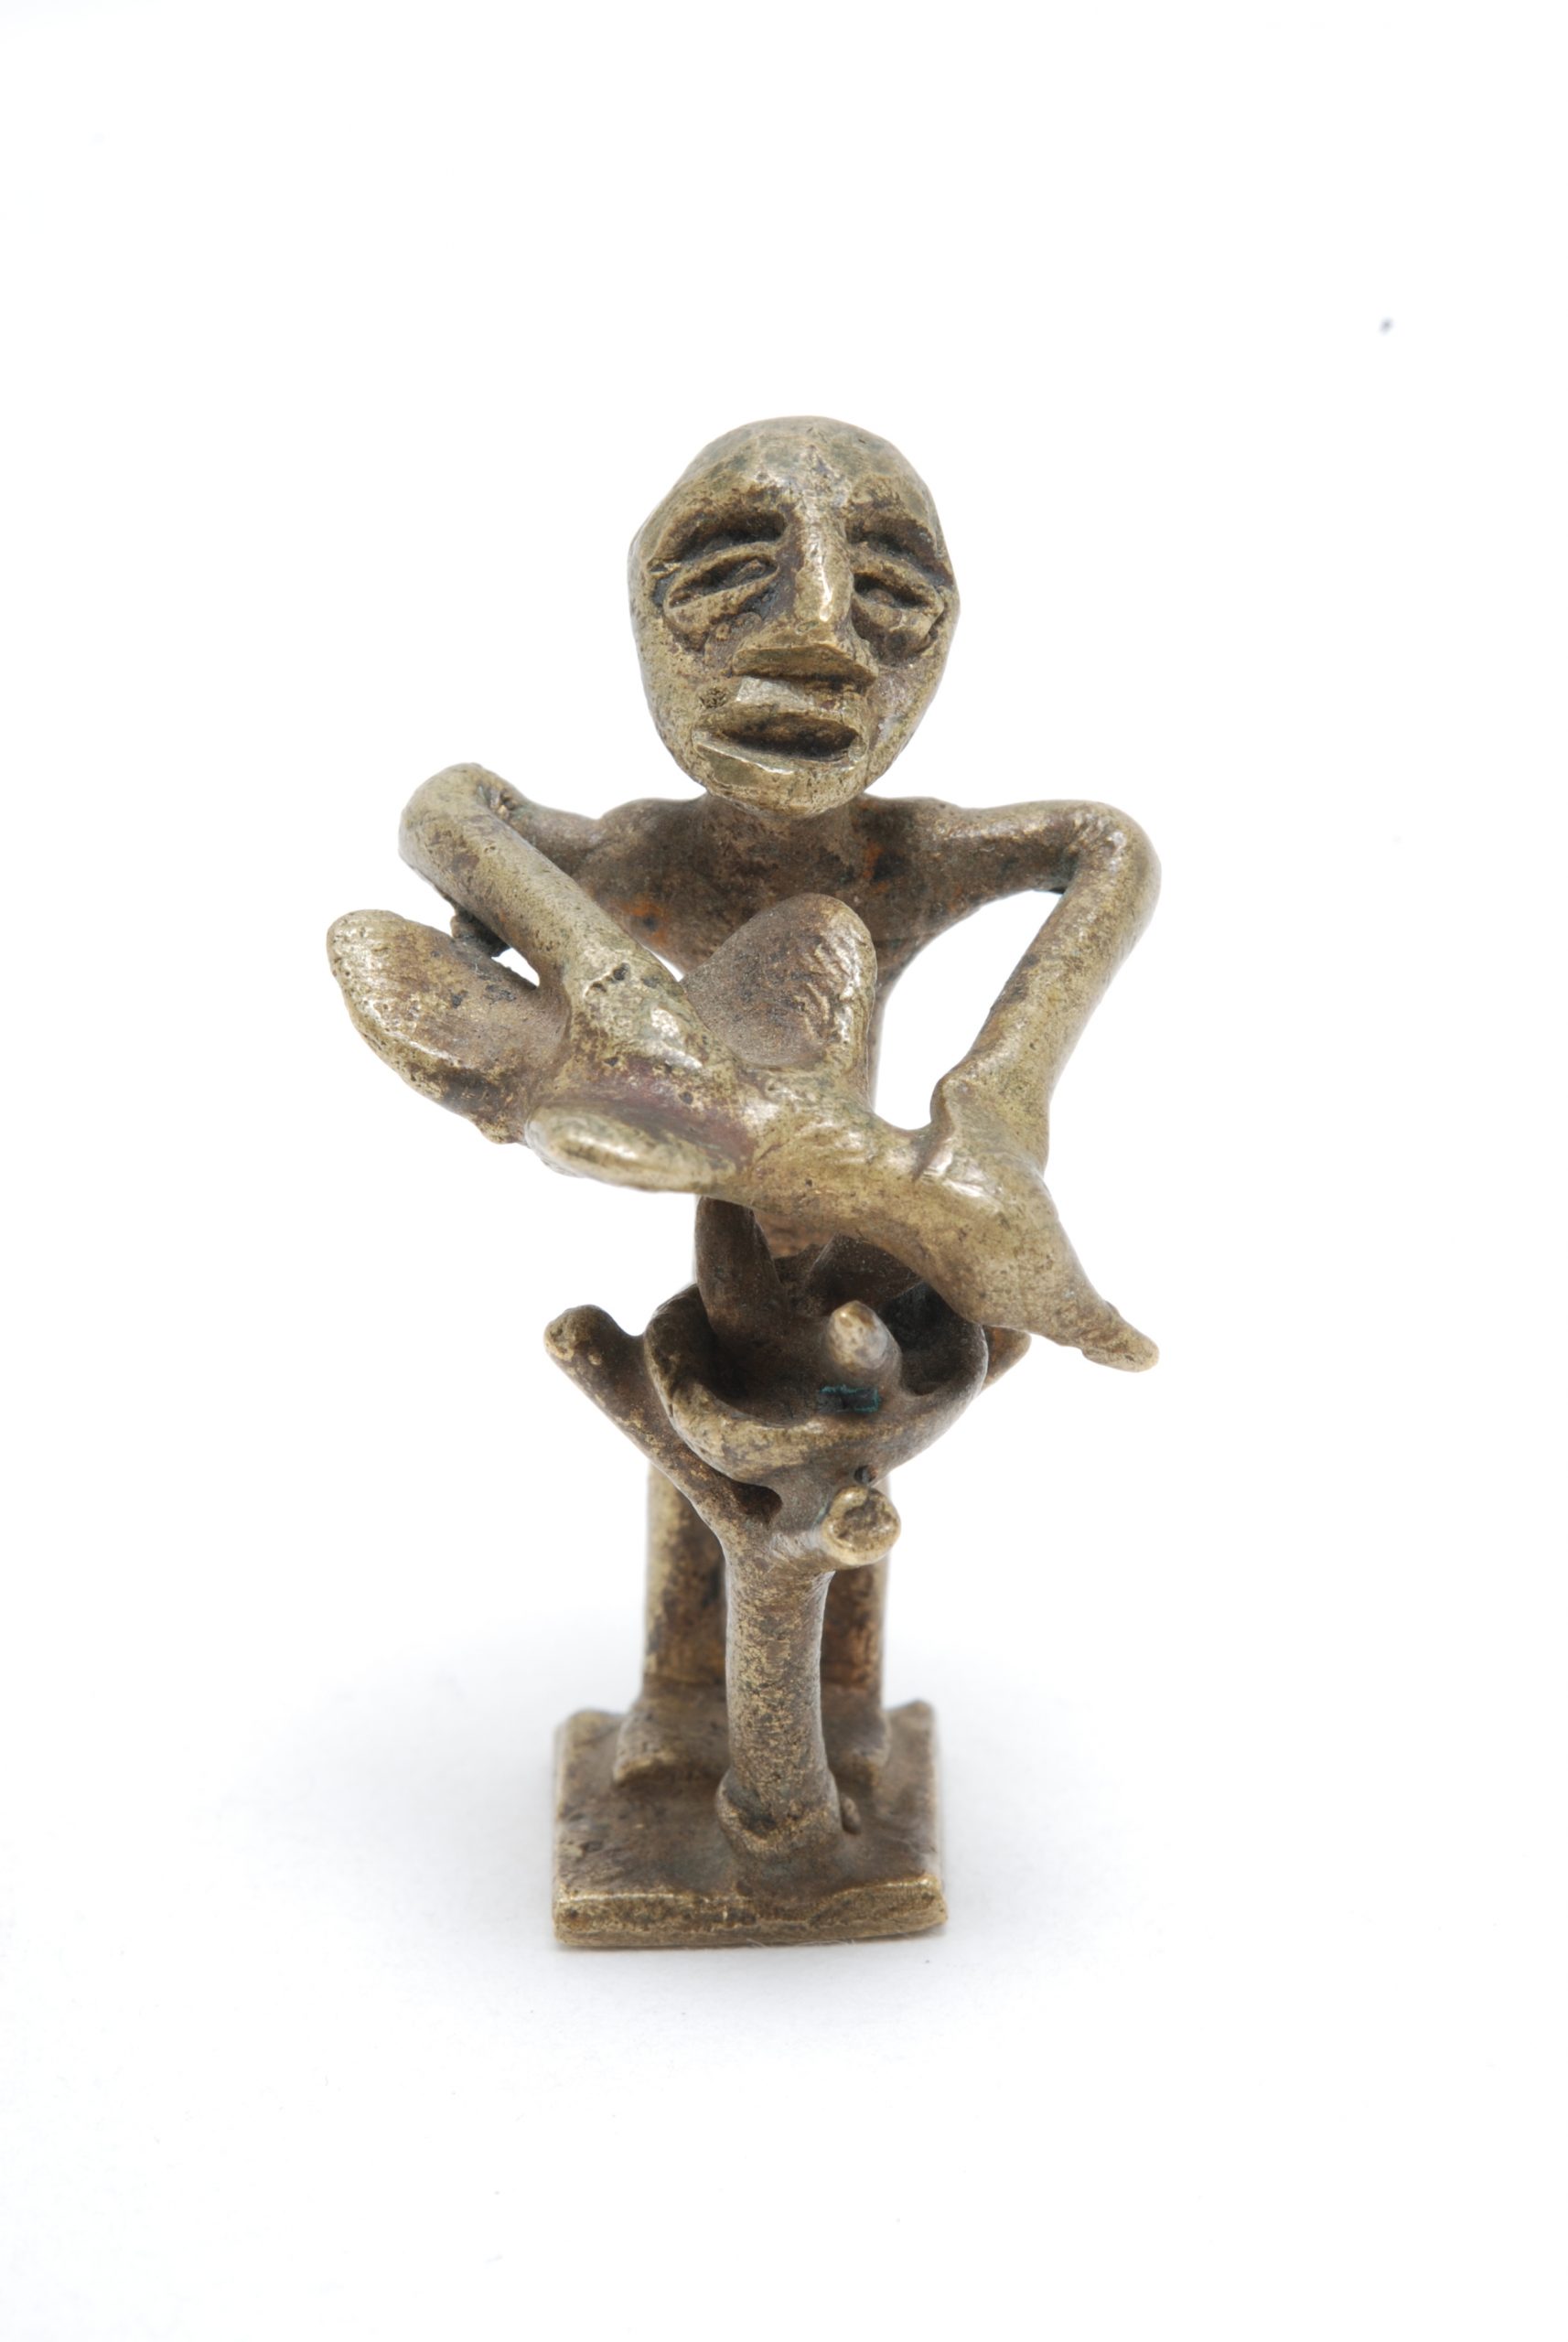 A brass abrammo, or goldweight, depicting a man sacrificing a fowl to Nyame at the Nyame Dua, which has a bowl containing three eggs in its fork.